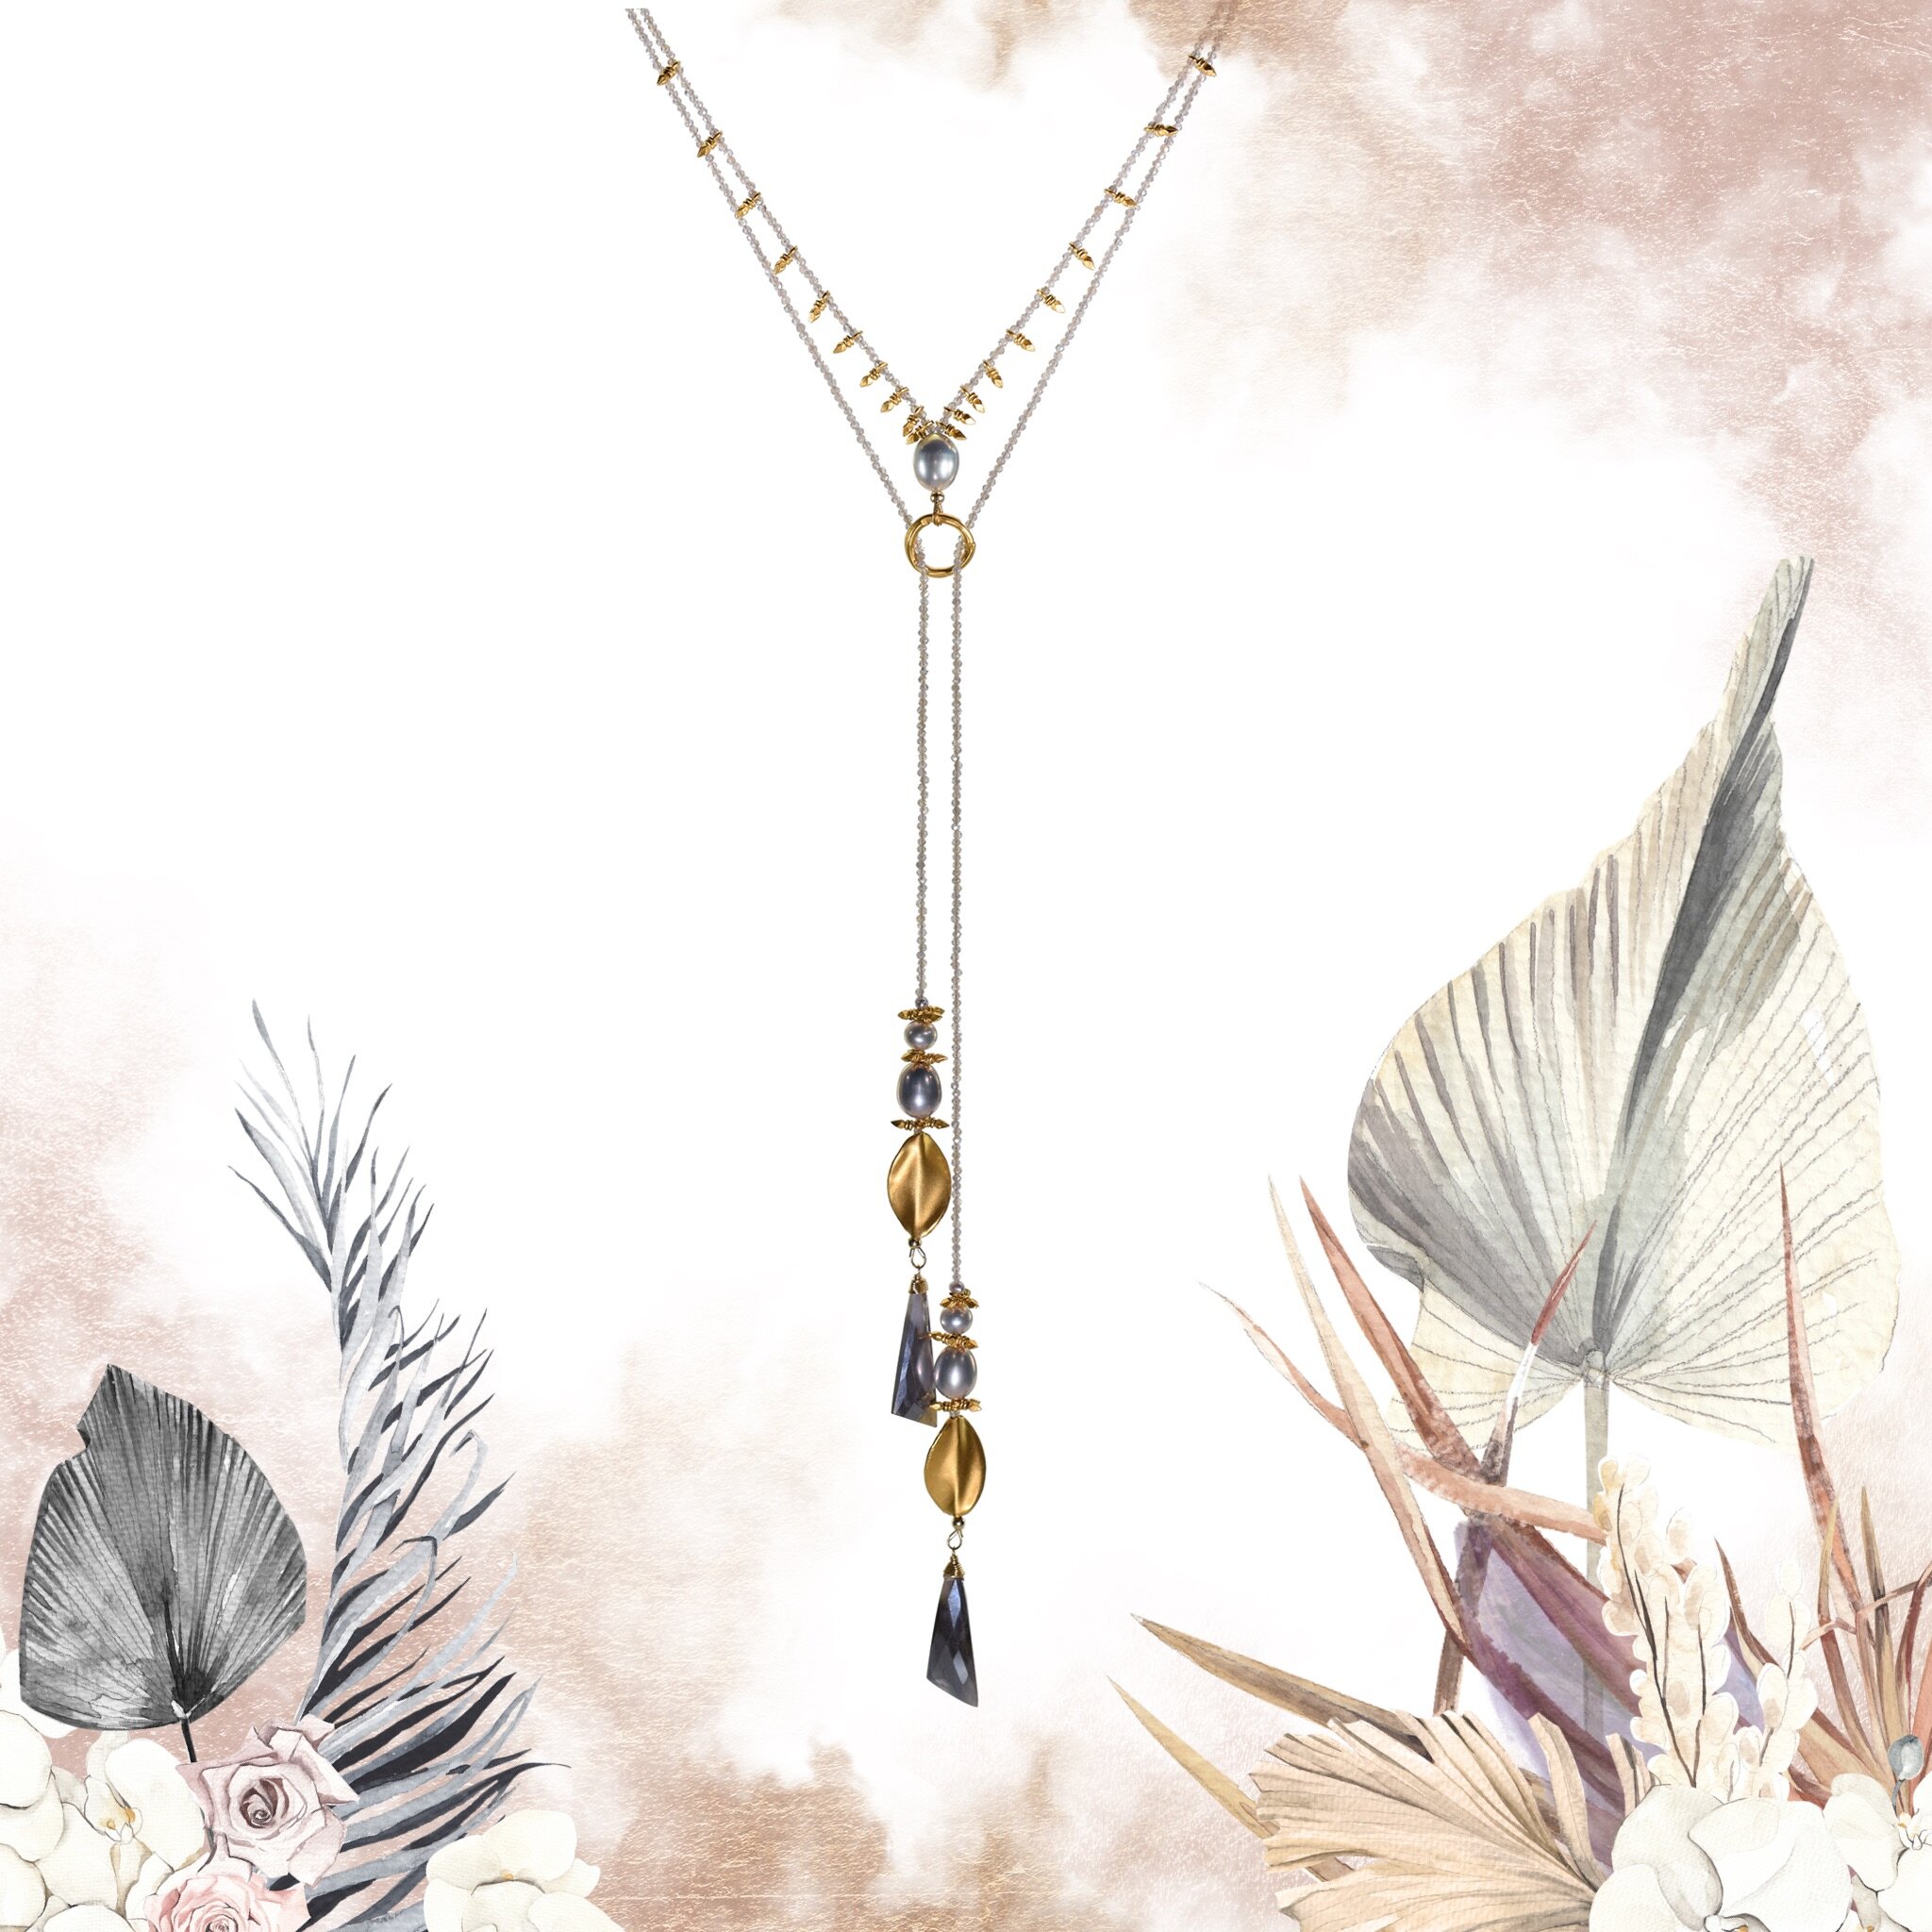 Femme Fatale Jewelry Collection Page — ANDREA LI